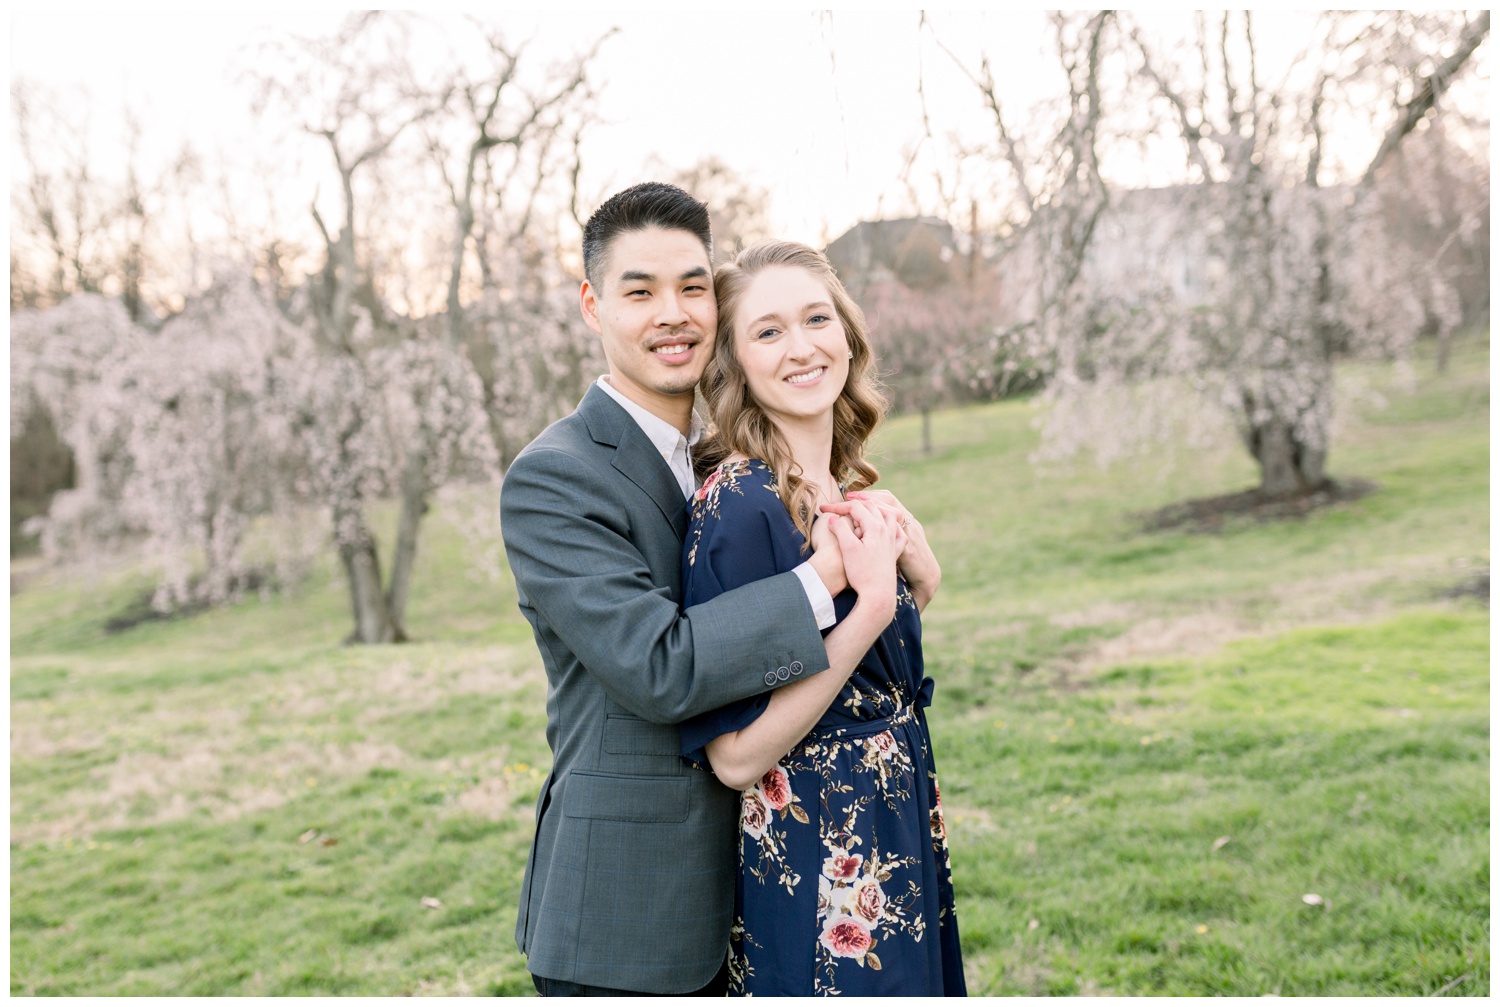 Ault Park Spring Engagement Session with Cherry Blossoms